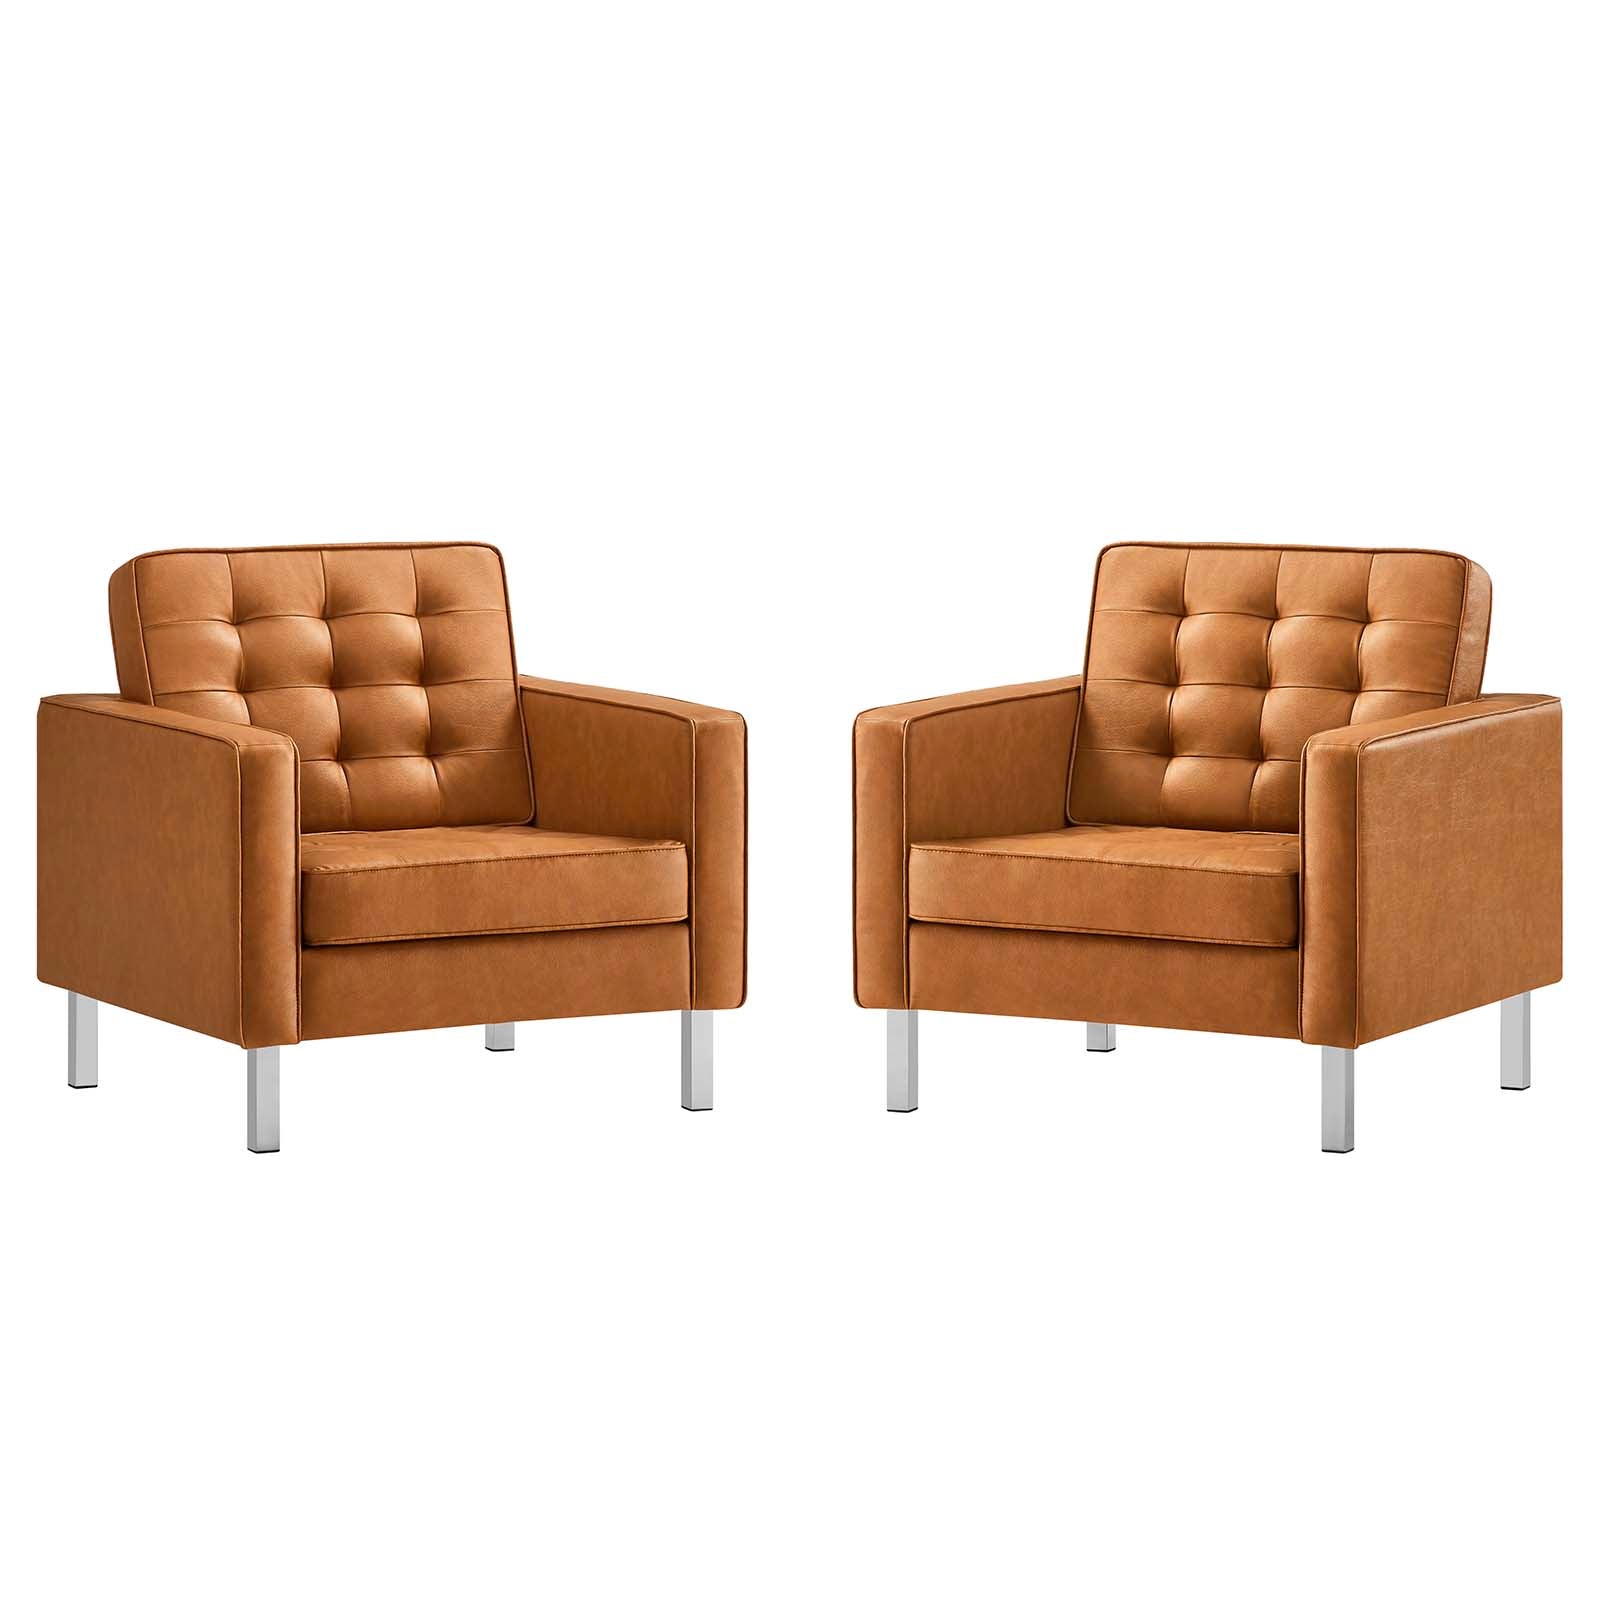 Modway Living Room Sets - Loft Tufted Upholstered Faux Leather Armchair Set of 2 Silver Tan